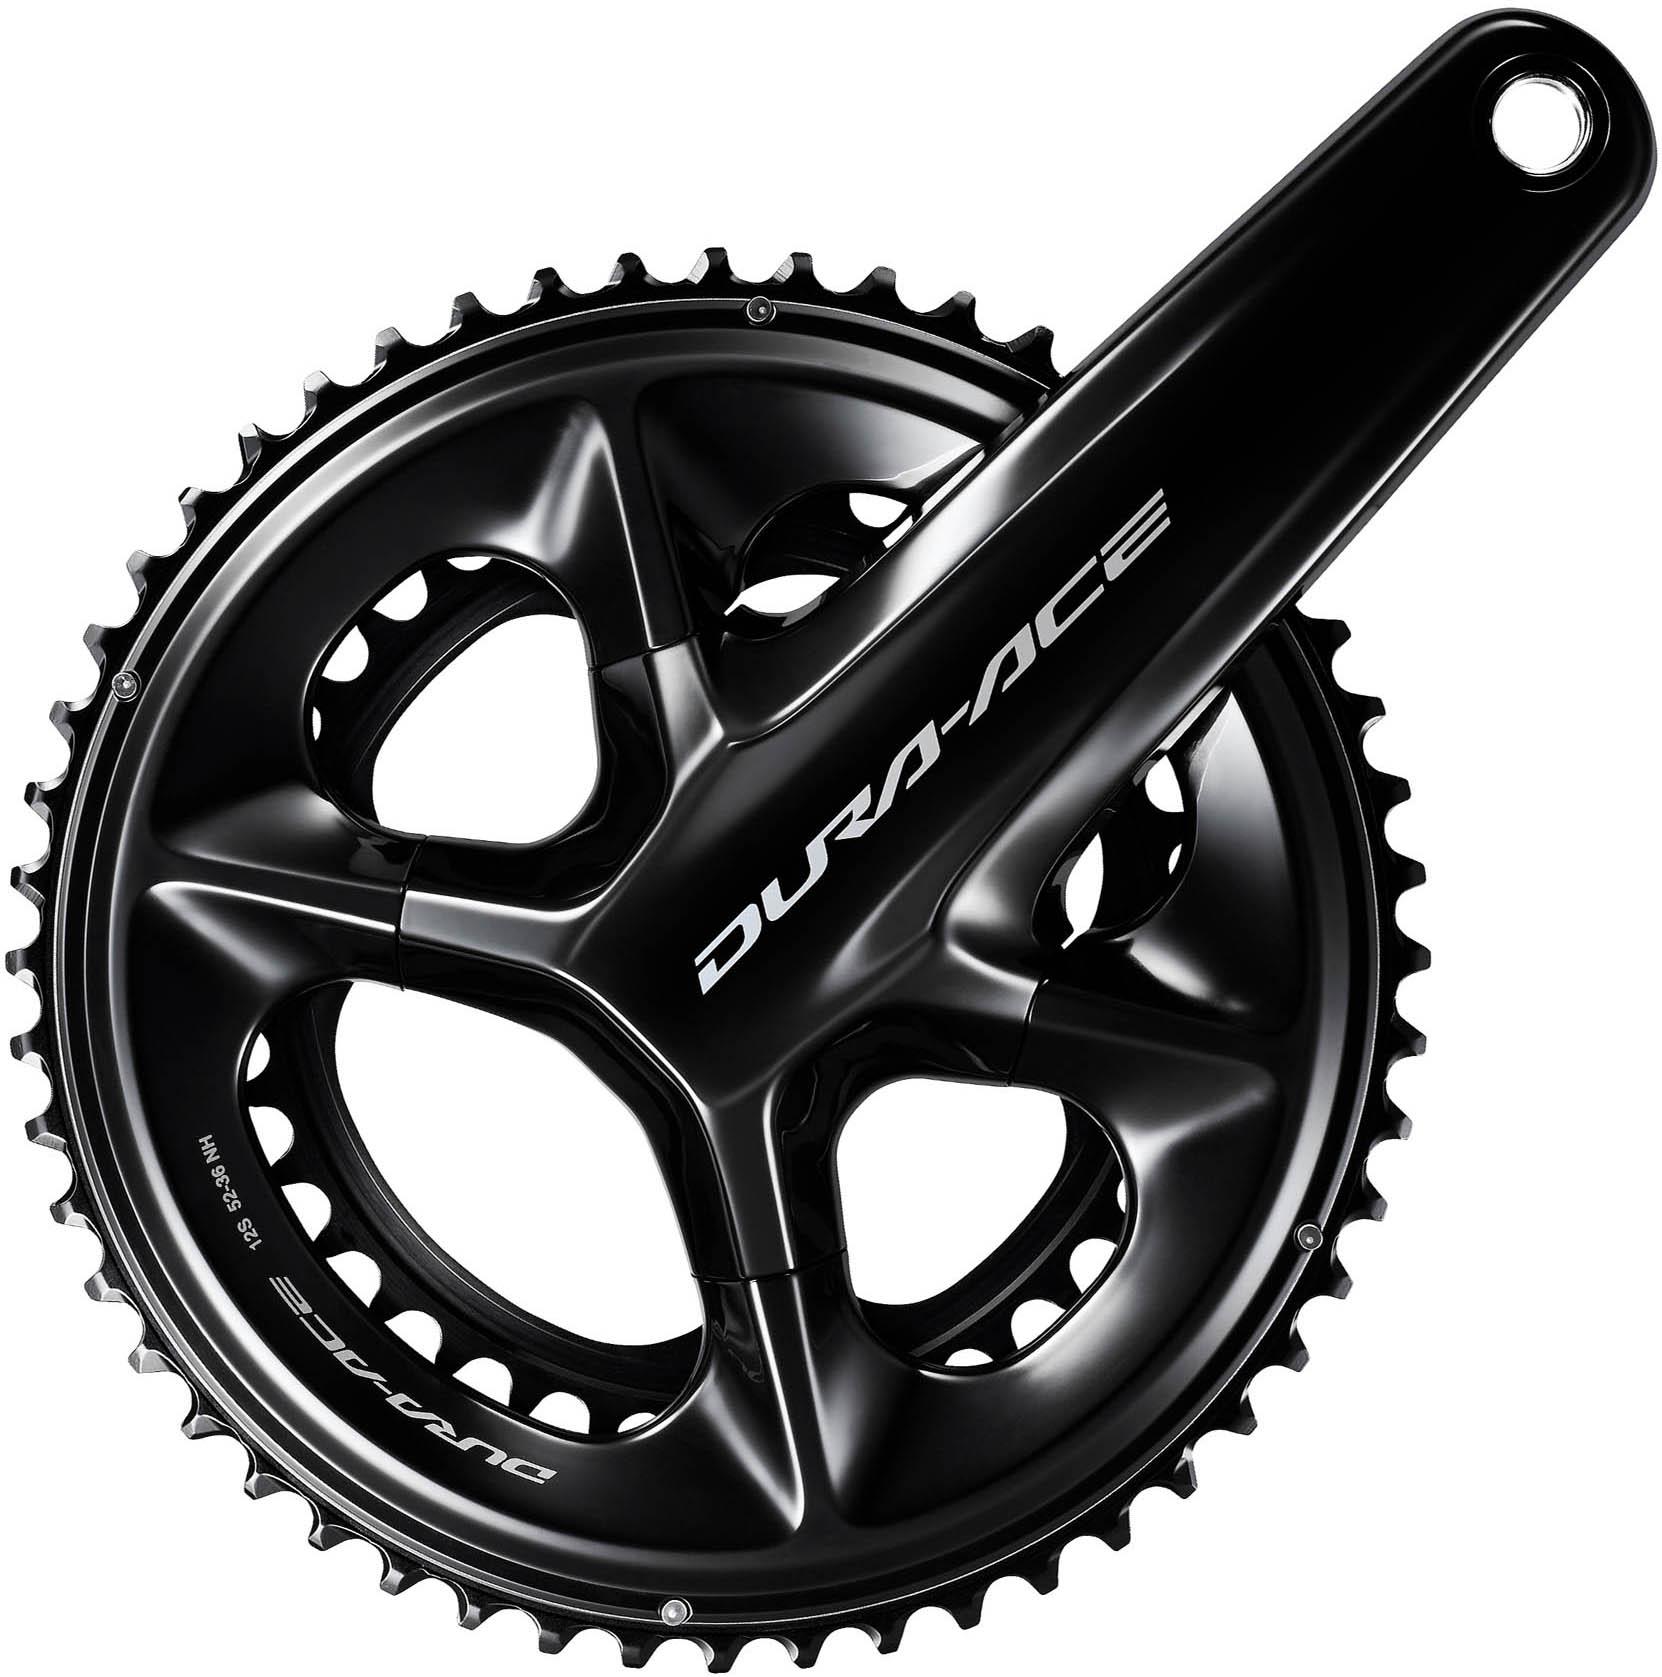 Shimano Dura-ace R9200 12 Speed Chainset - Black